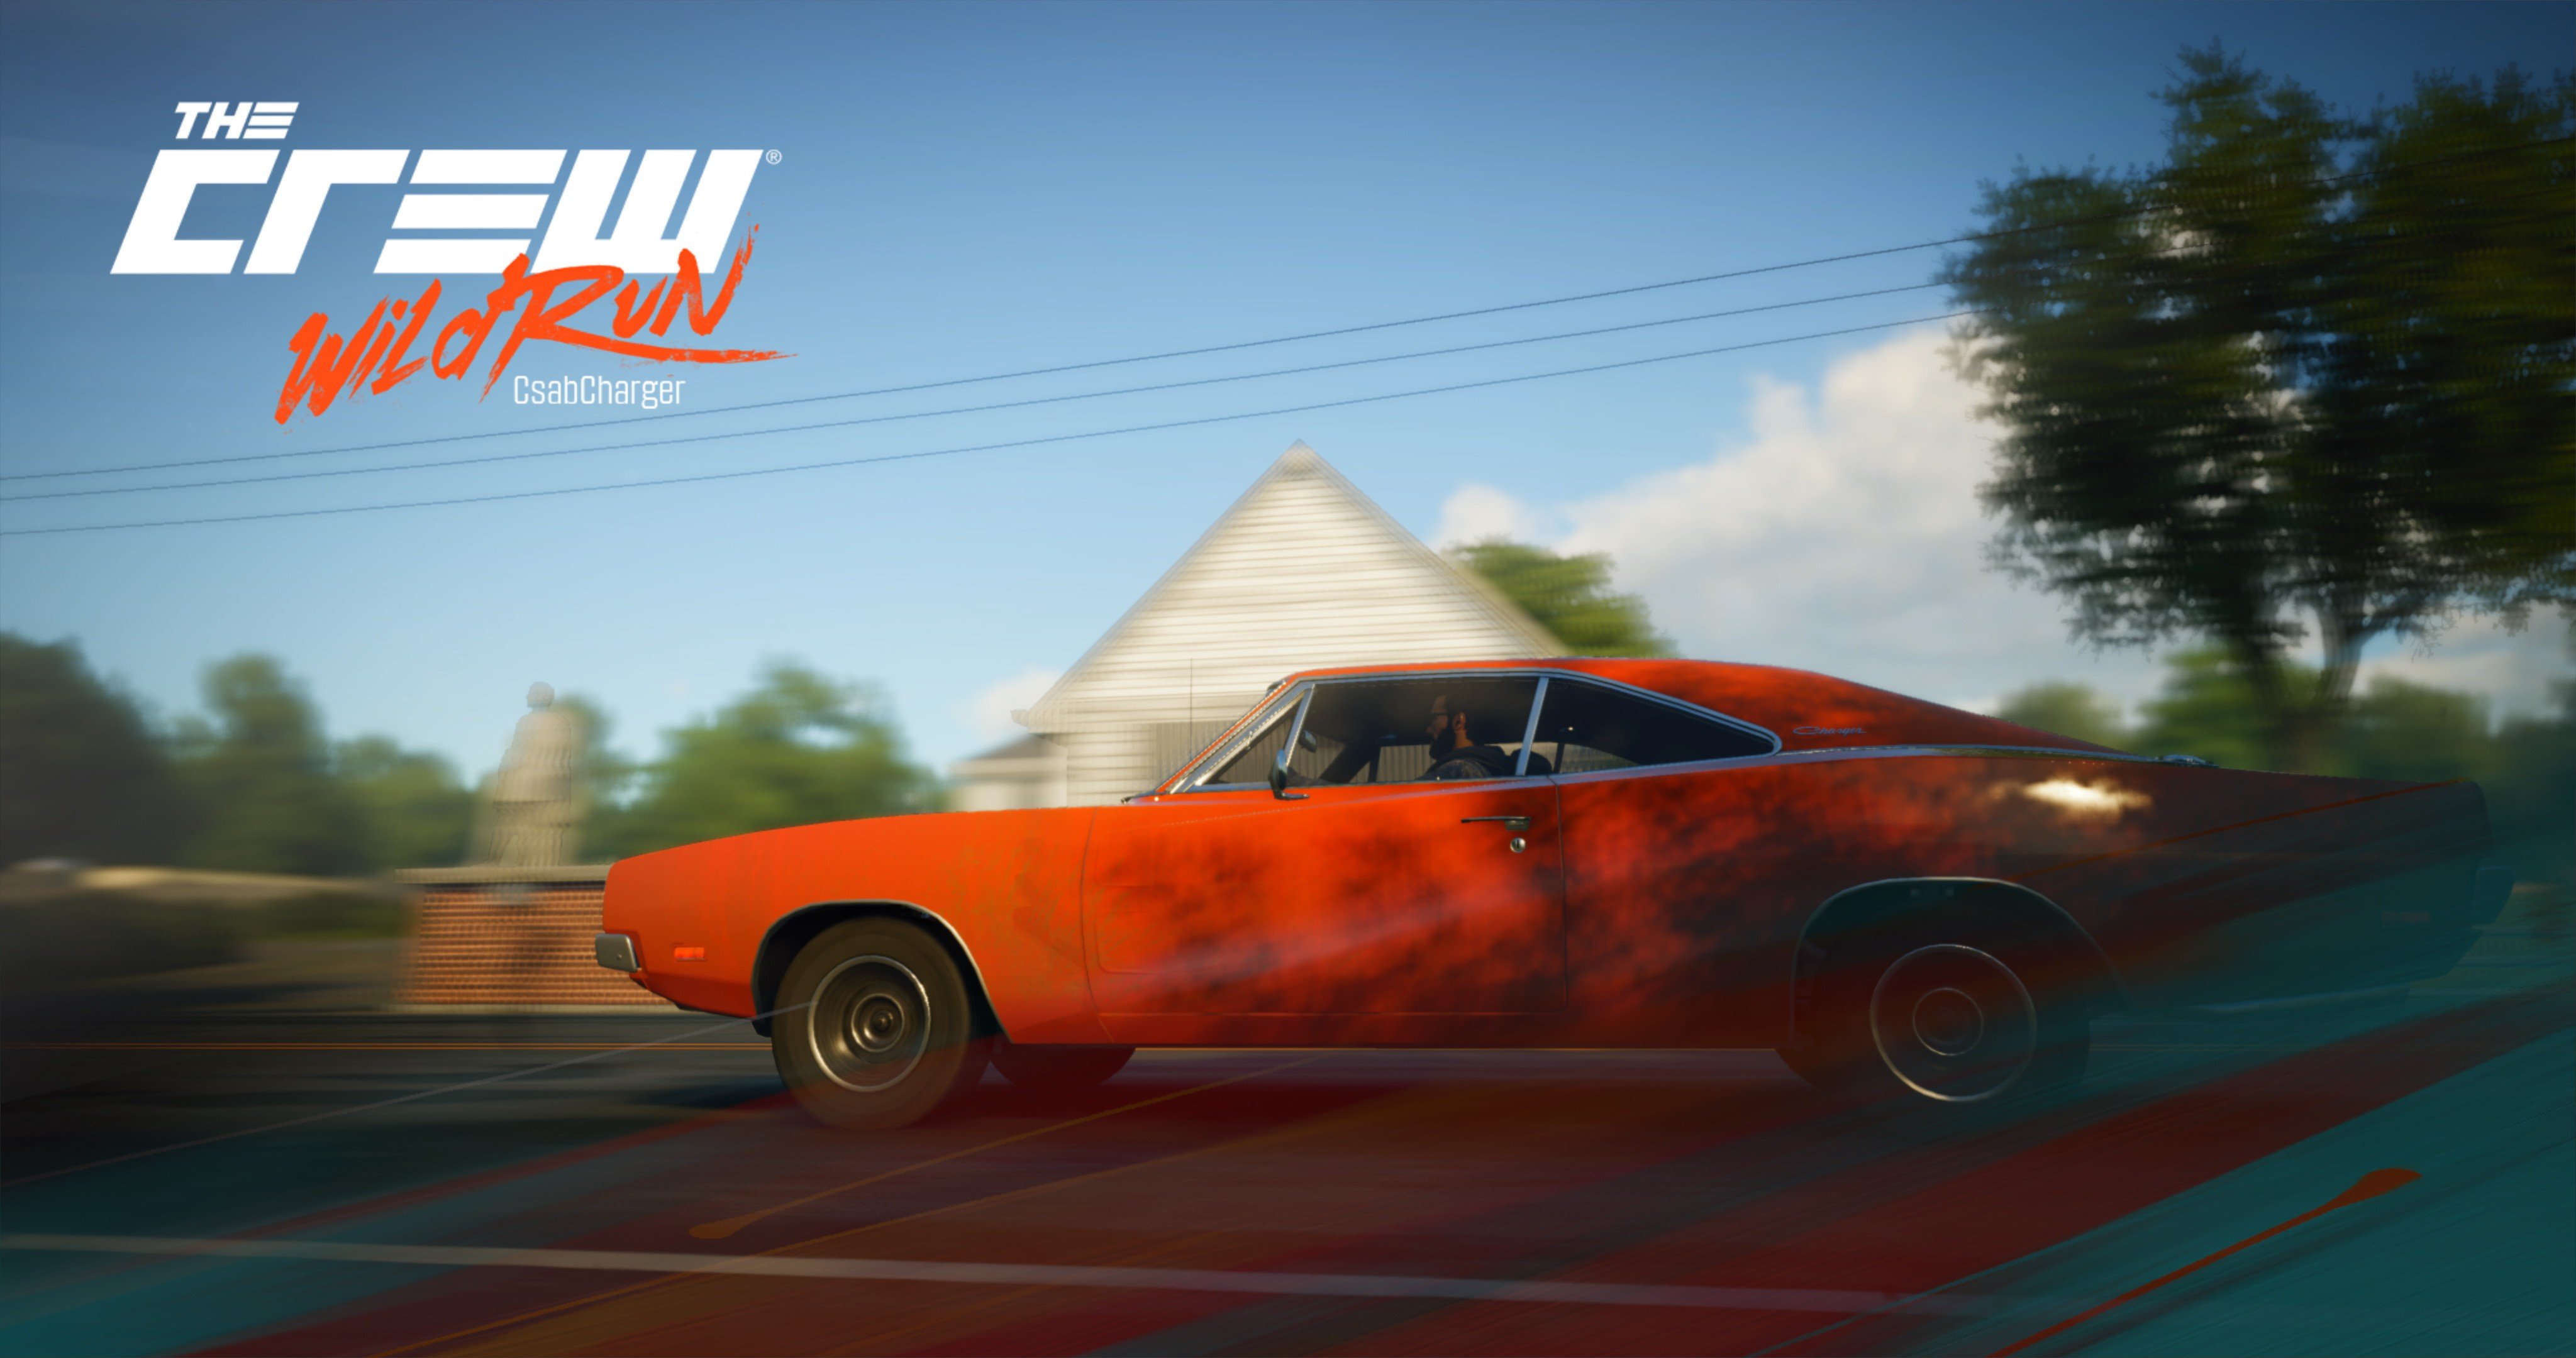 Dodge Charger R T 1968, Race cars, The Crew, The Crew Wild Run Wallpaper